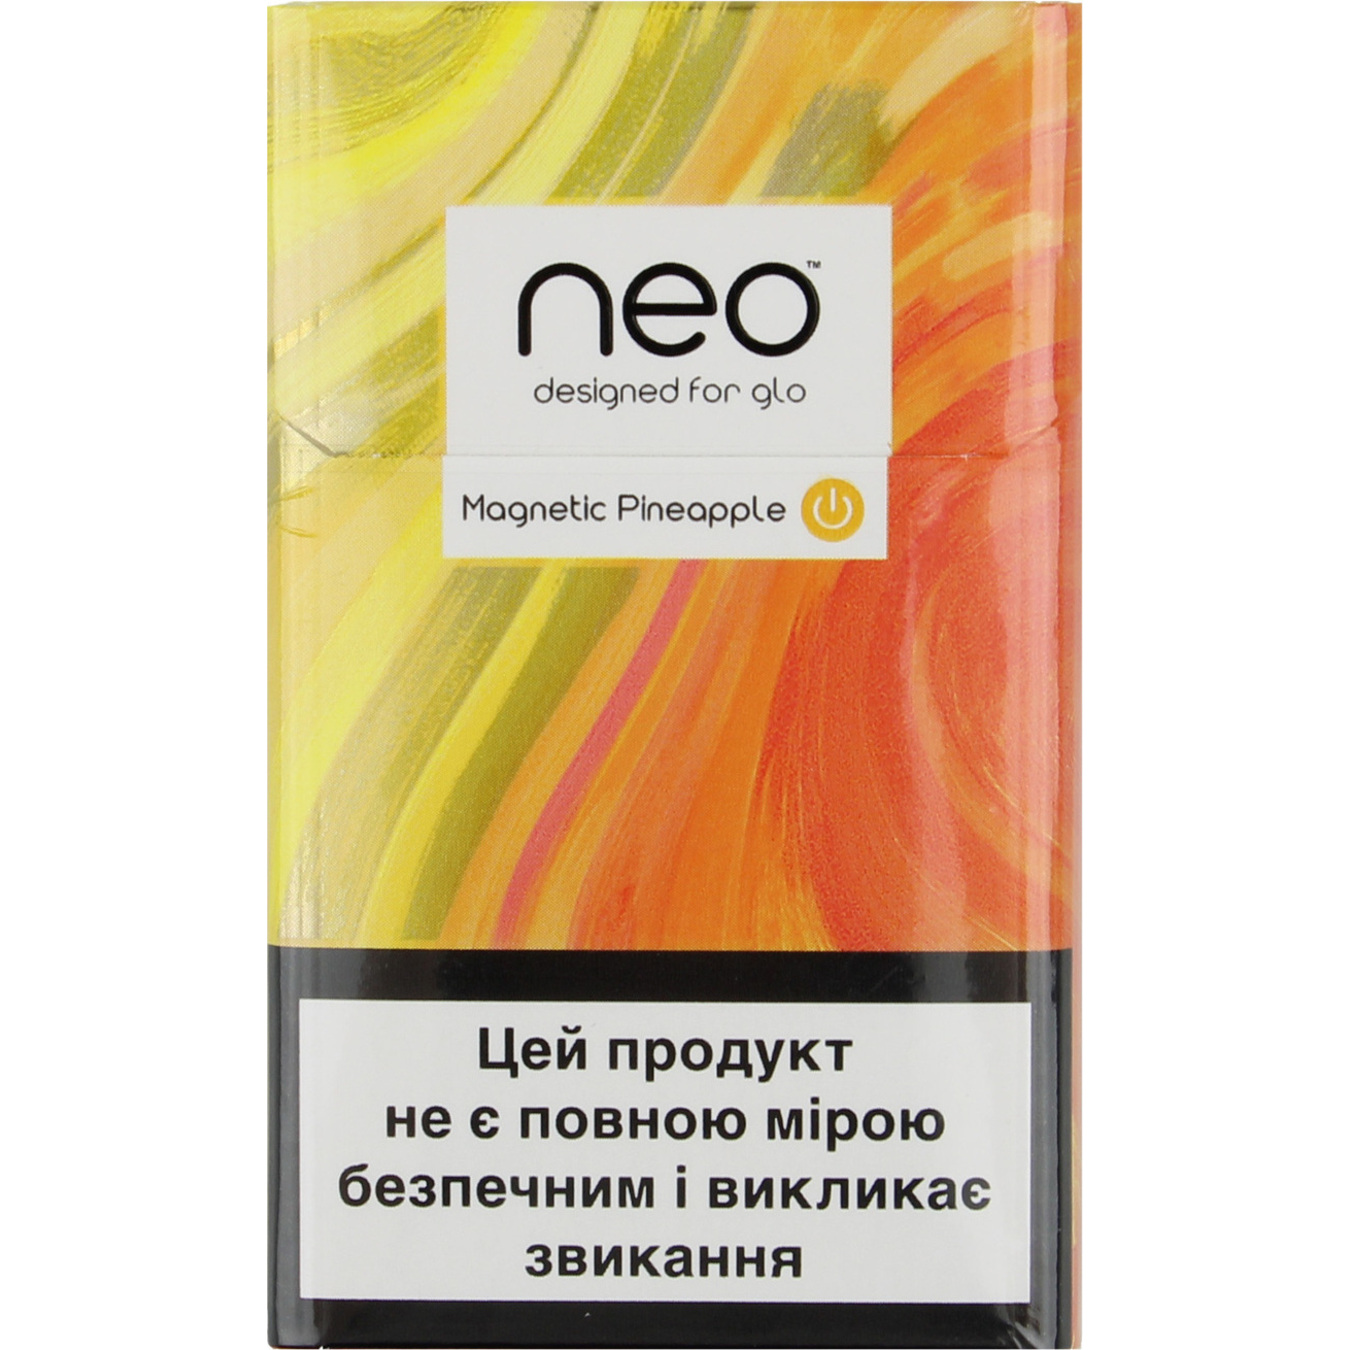 Tobacco Sticks Neo Demi Magnetic Pineapple for heating 20 pcs (the price is indicated without excise tax)